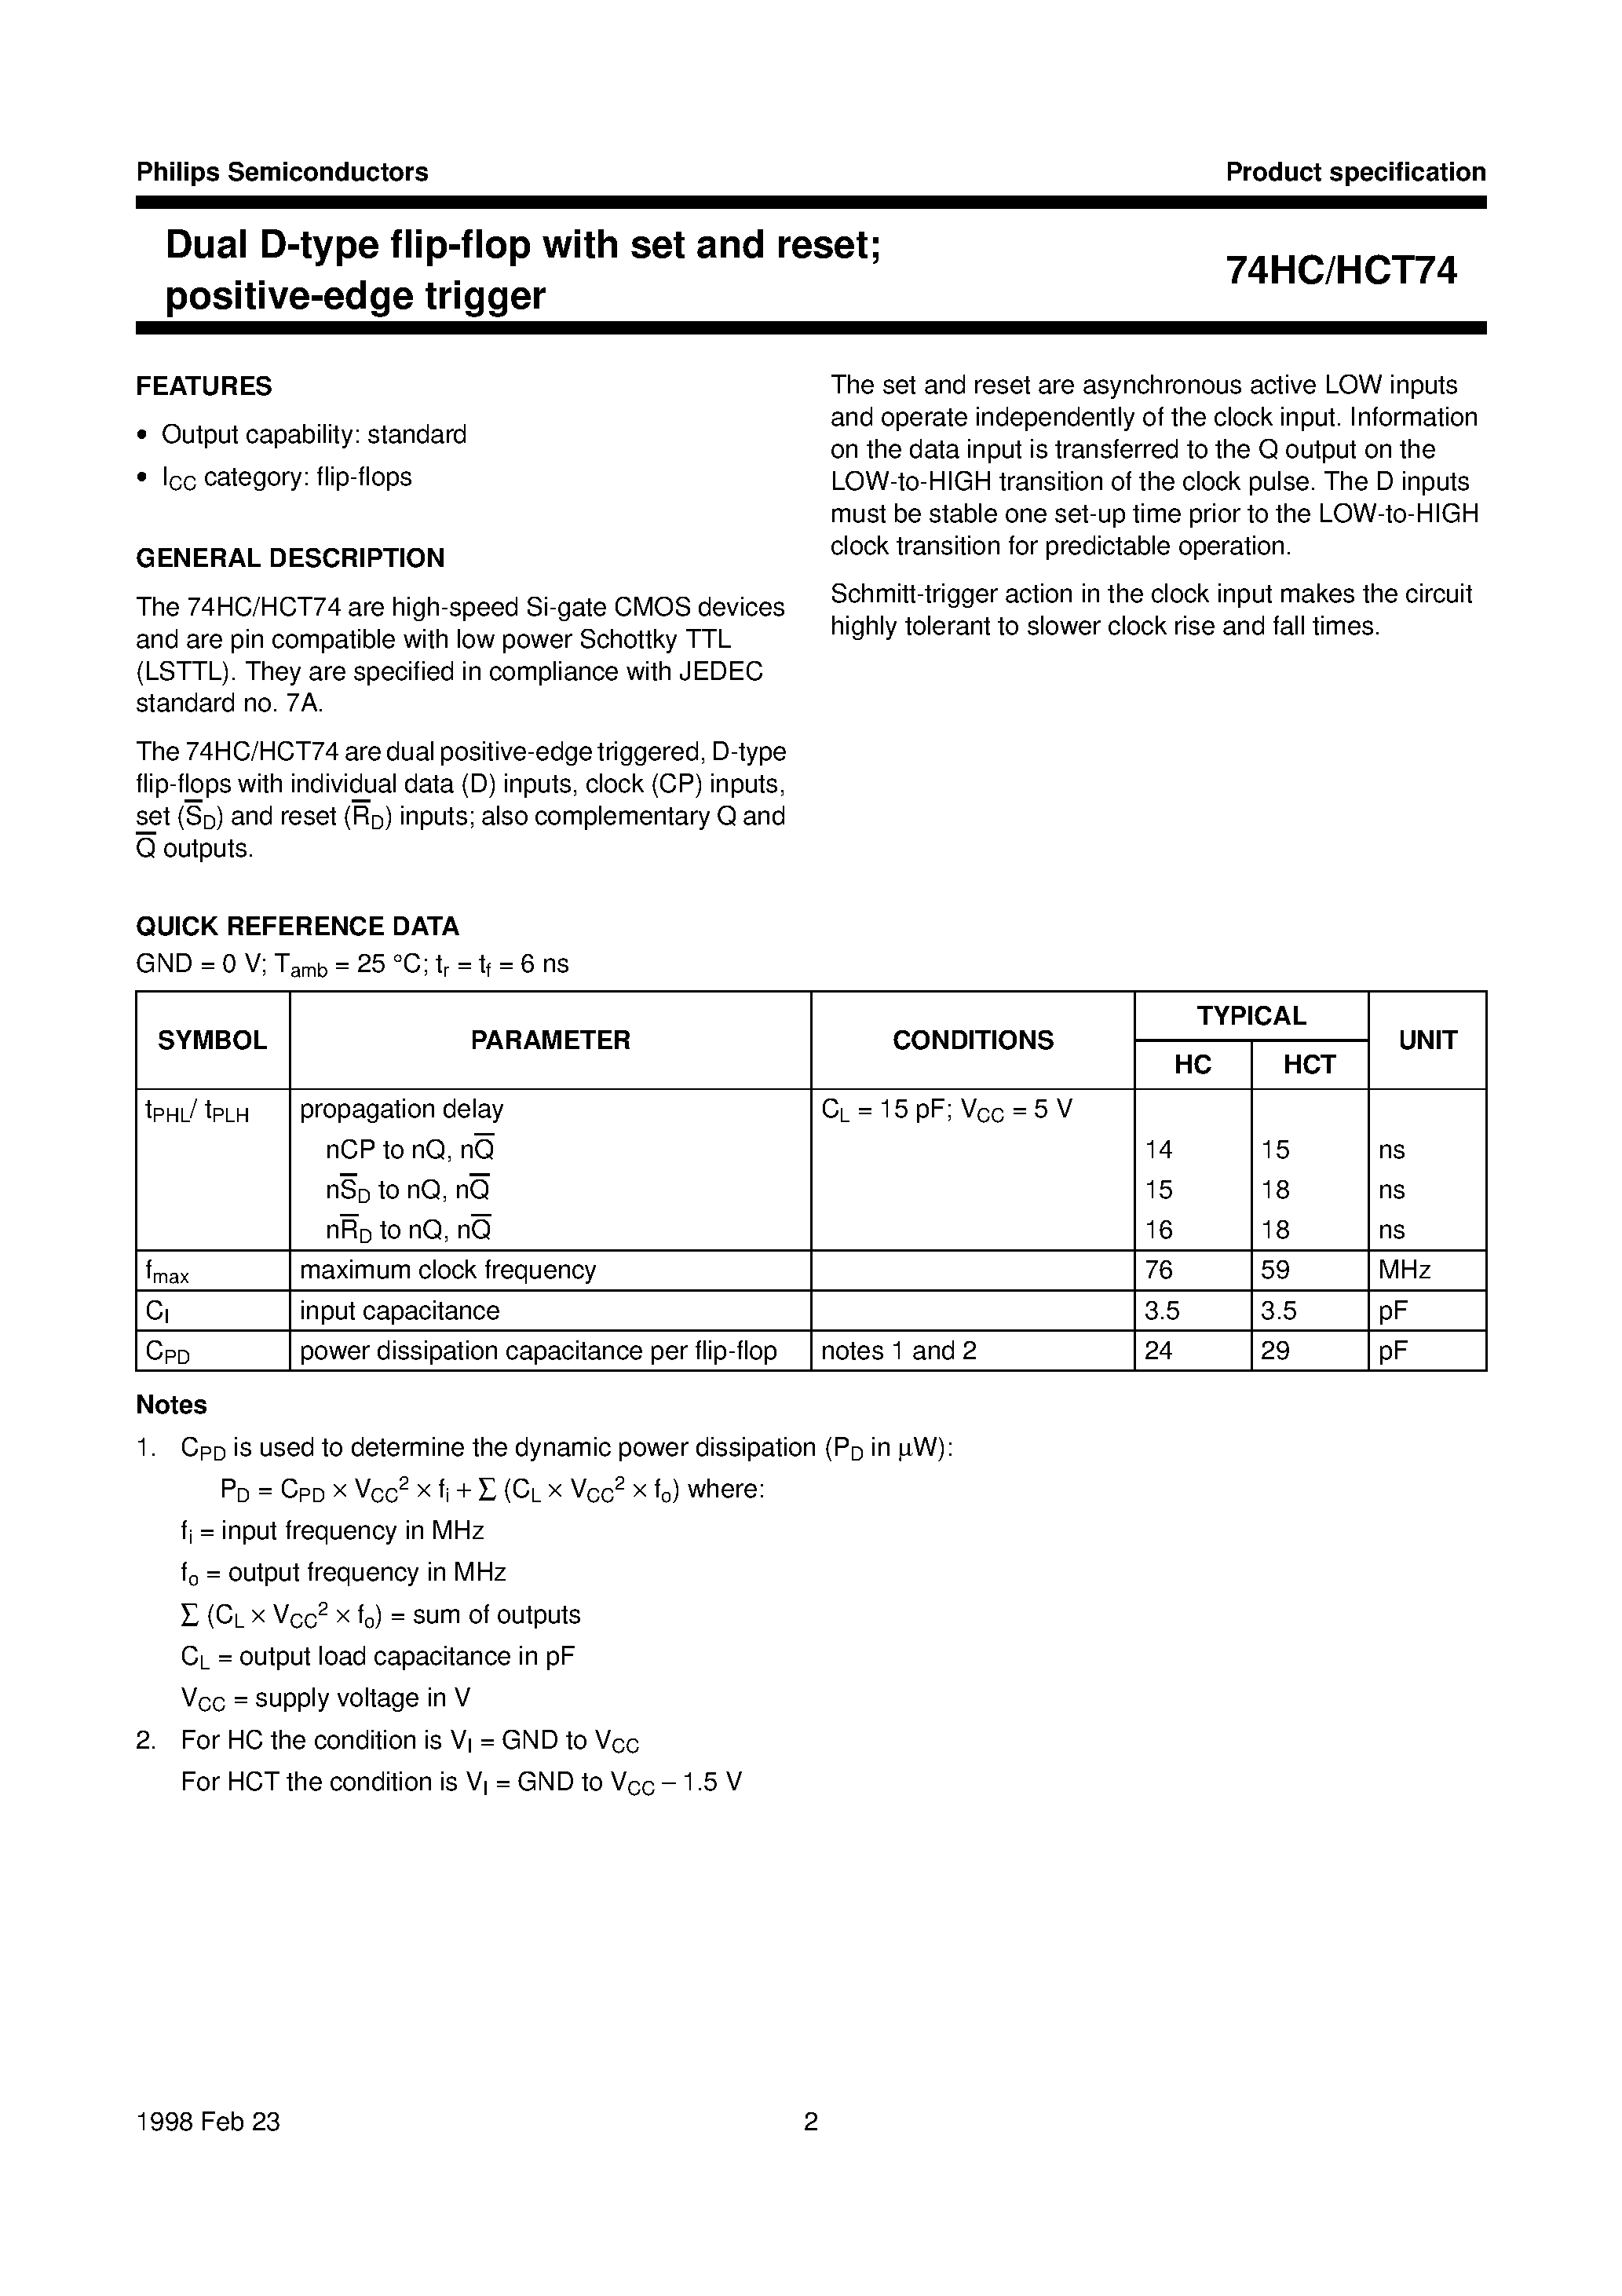 Datasheet 74HCT74 - Dual D-type flip-flop with set and reset; positive-edge trigger page 2